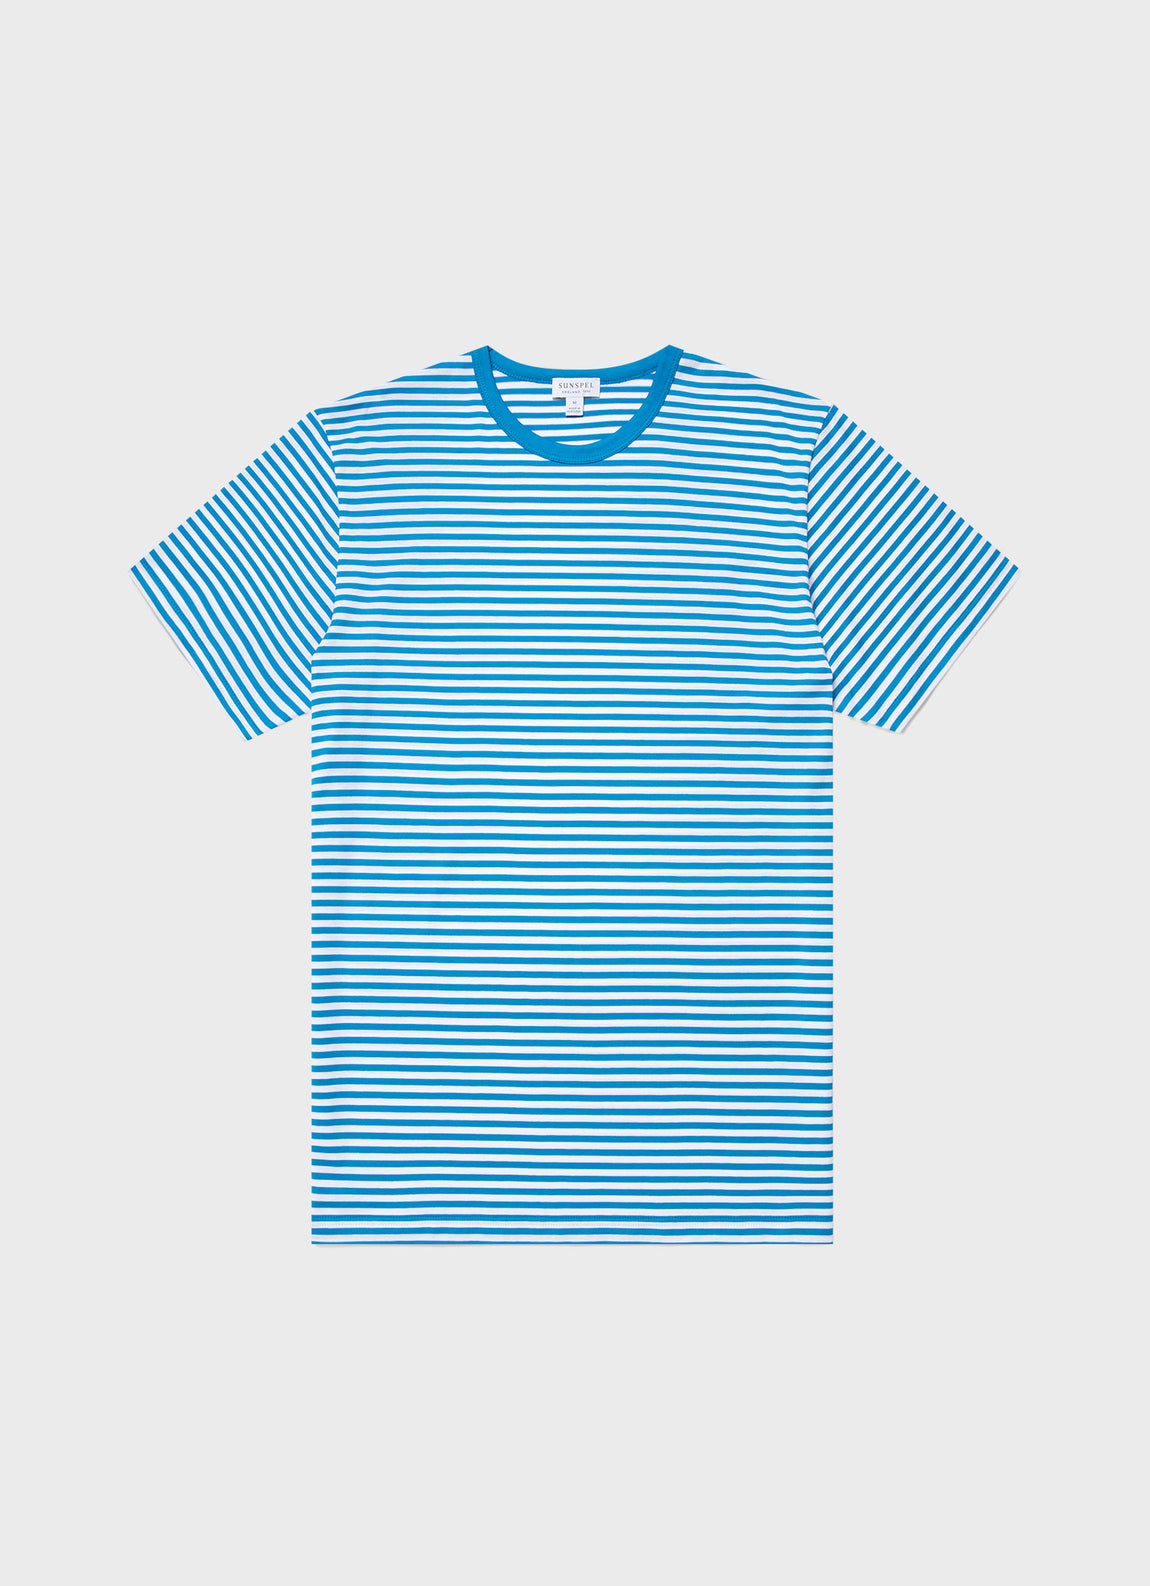 Men's Classic T-shirt in White/Turquoise English